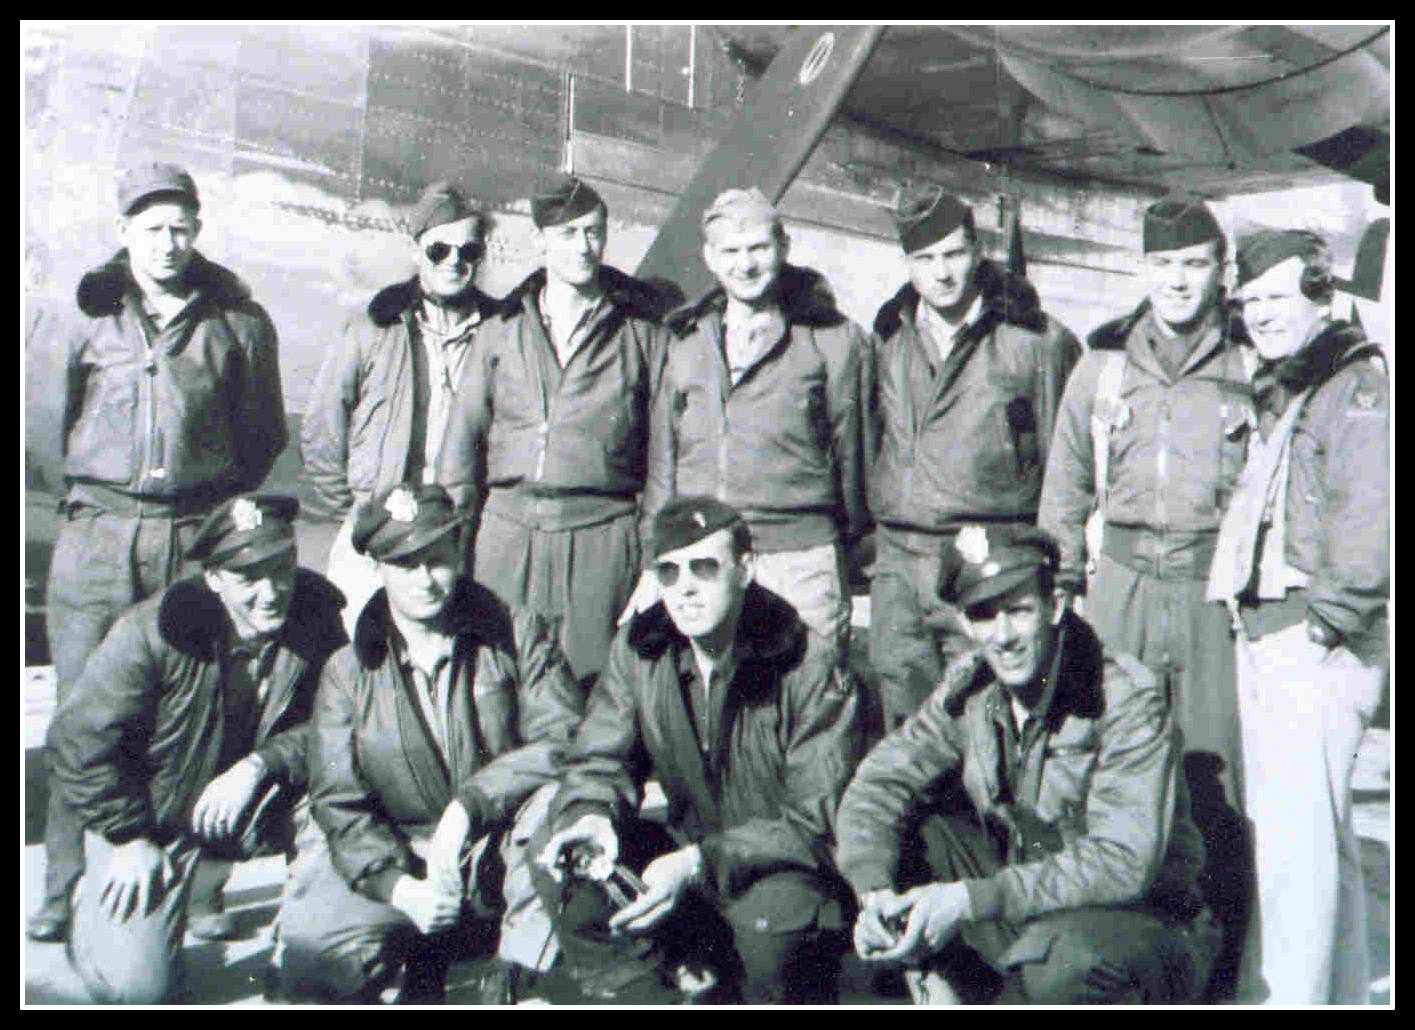 Air crew with S/Sgt. Clatie R. Cunningham, of Tennessee and Belleville, NJ